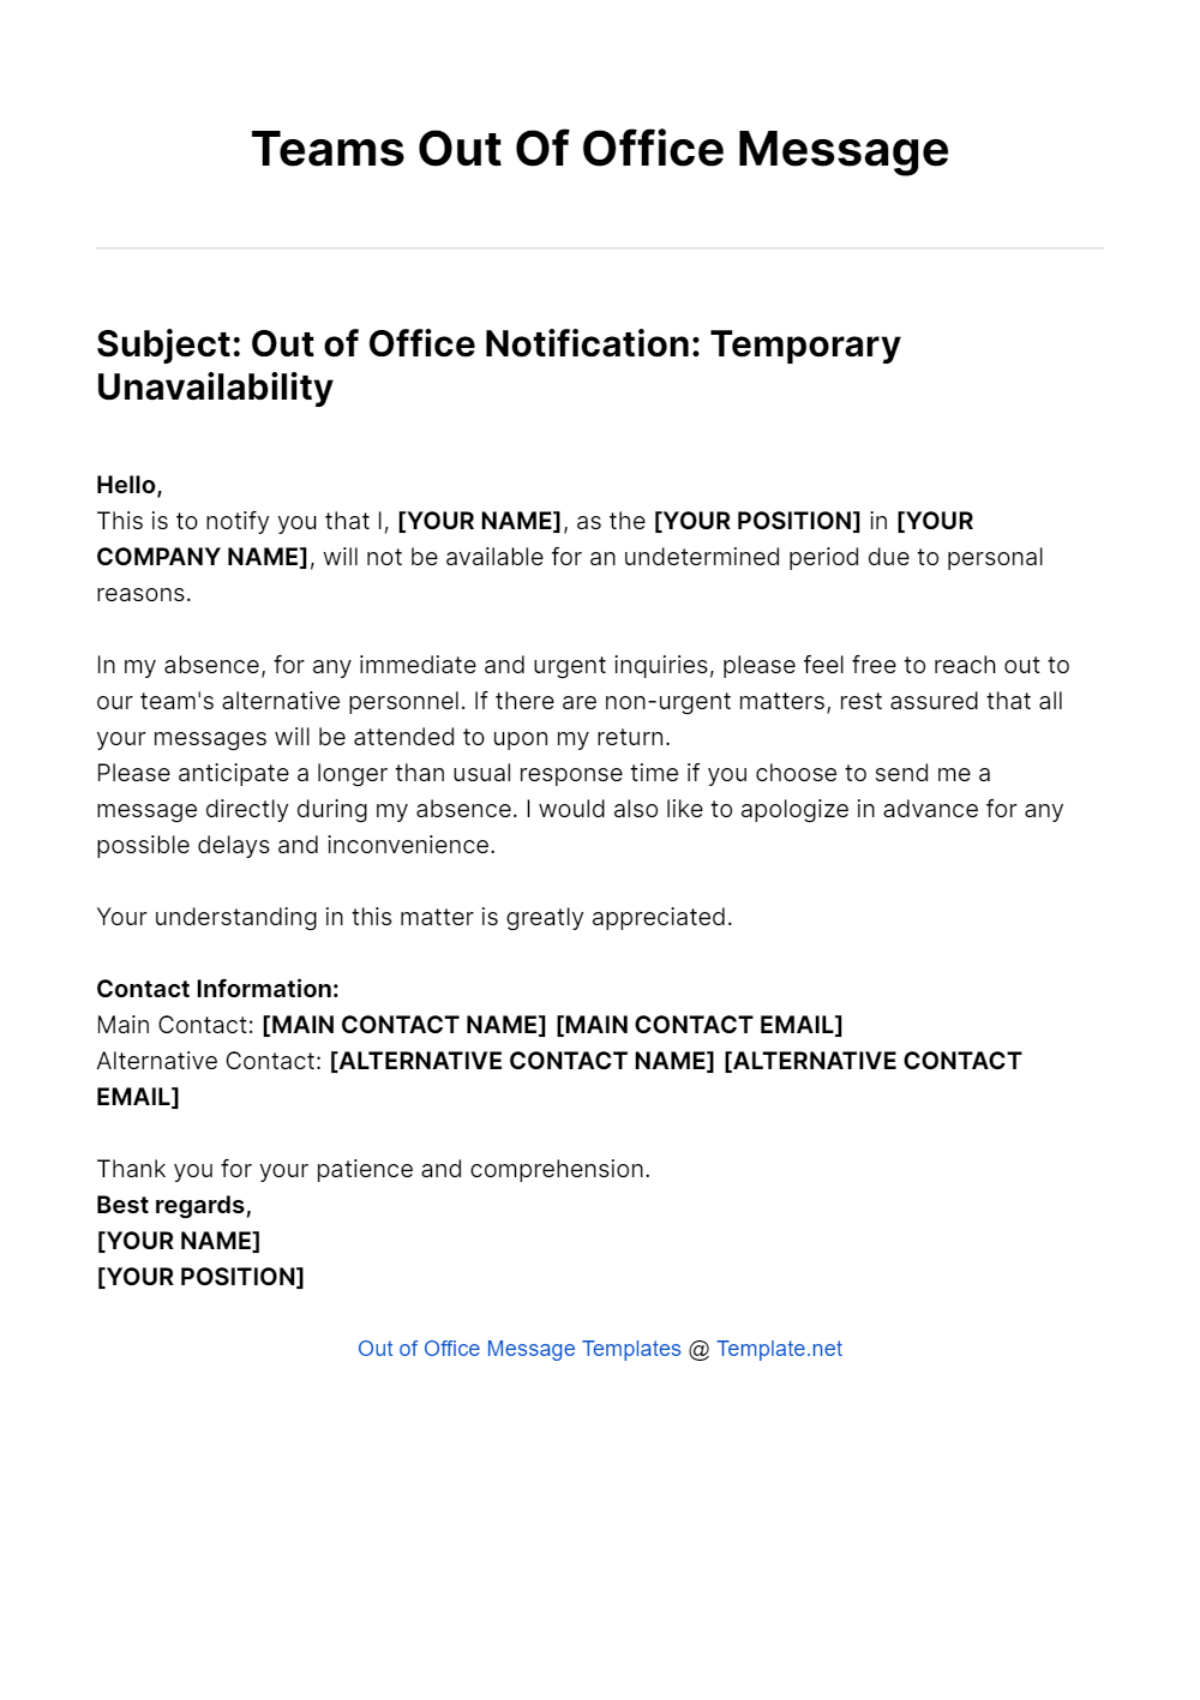 Teams Out Of Office Message Template